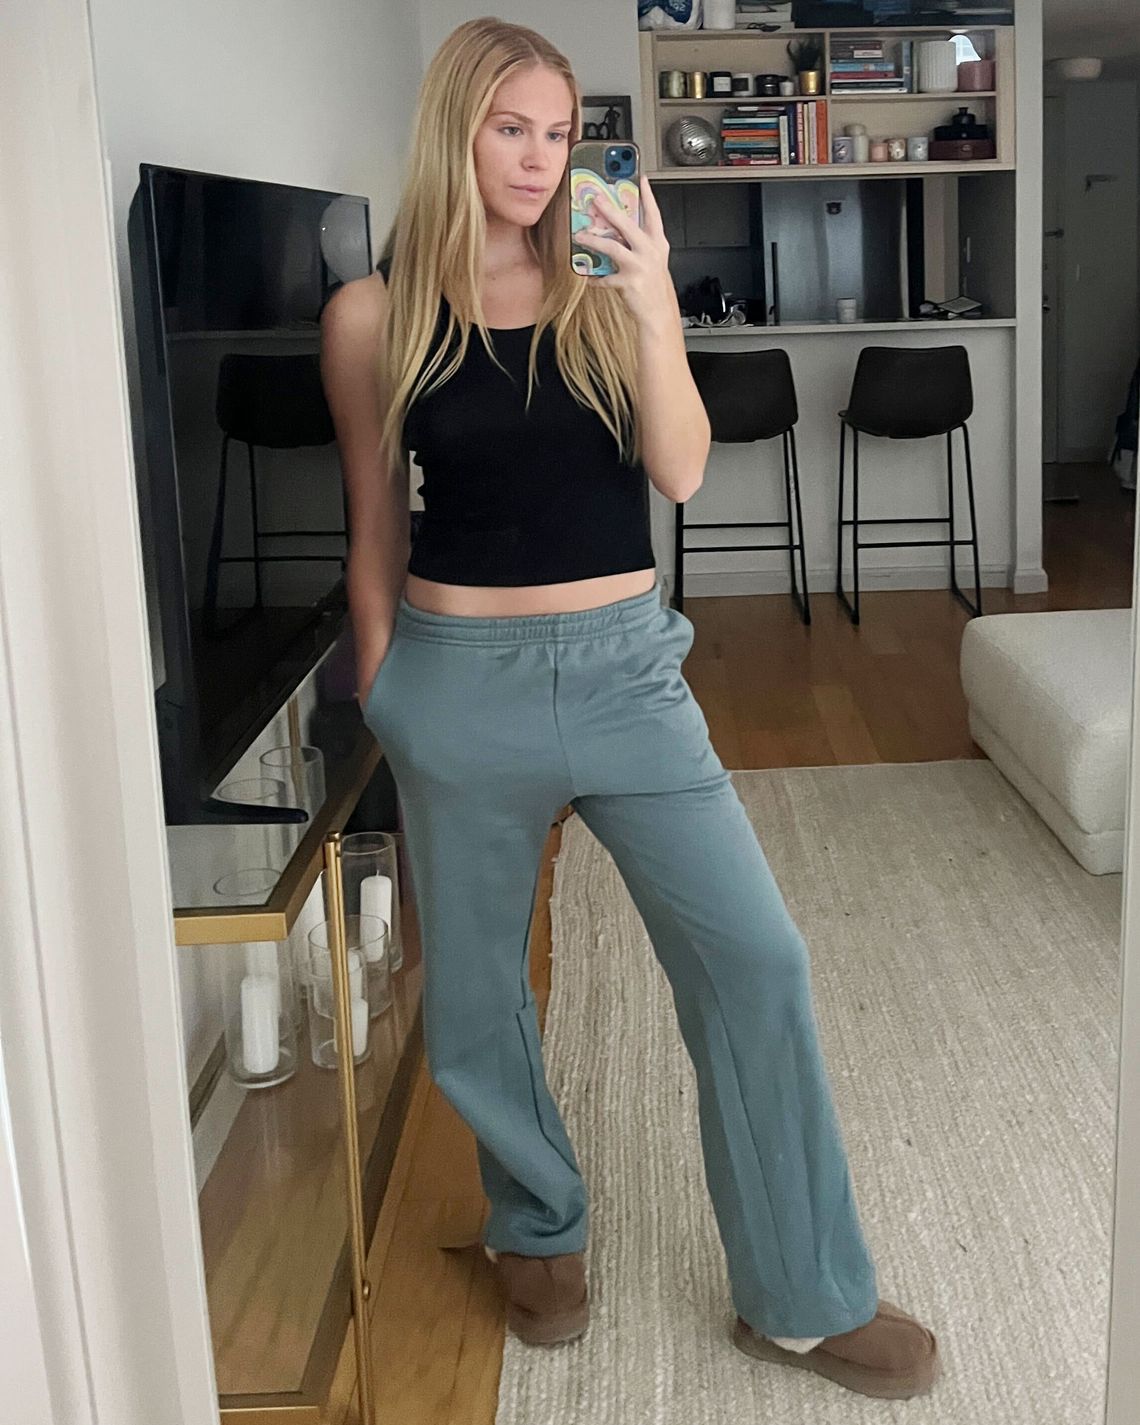 Women's Sweatpants- I saw someone post about this not too long ago